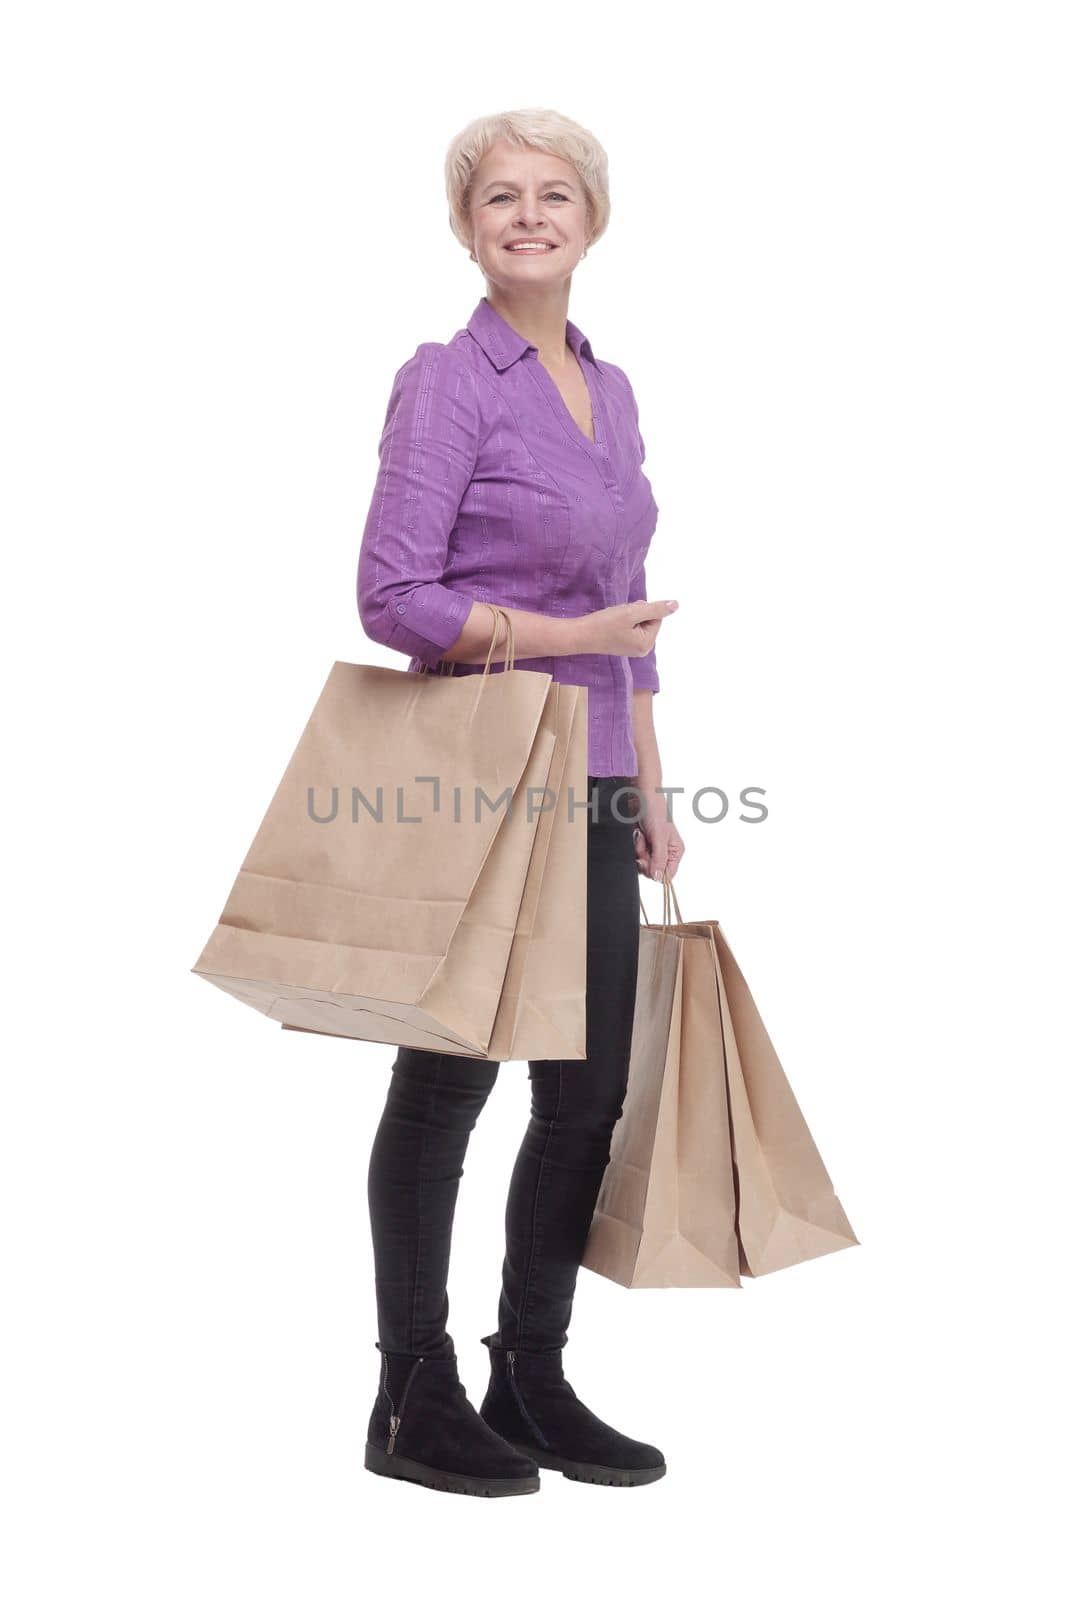 in full growth. smiling casual woman with shopping bags. isolated on a white background.